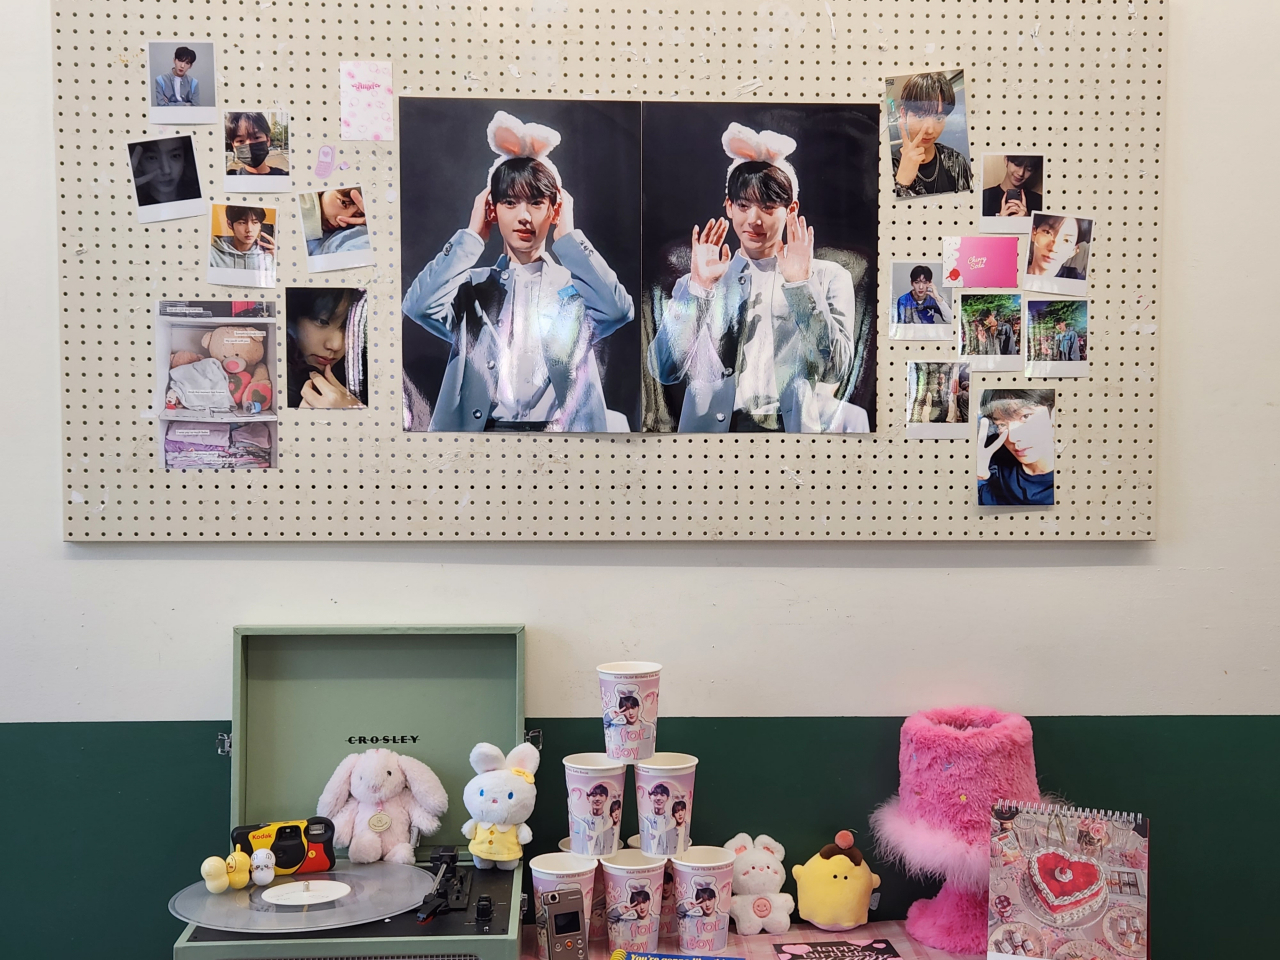 Birthday cafes are hosted by fans, displaying goods including dolls, picture postcards, calendars and photo books. (Courtesy of reader)